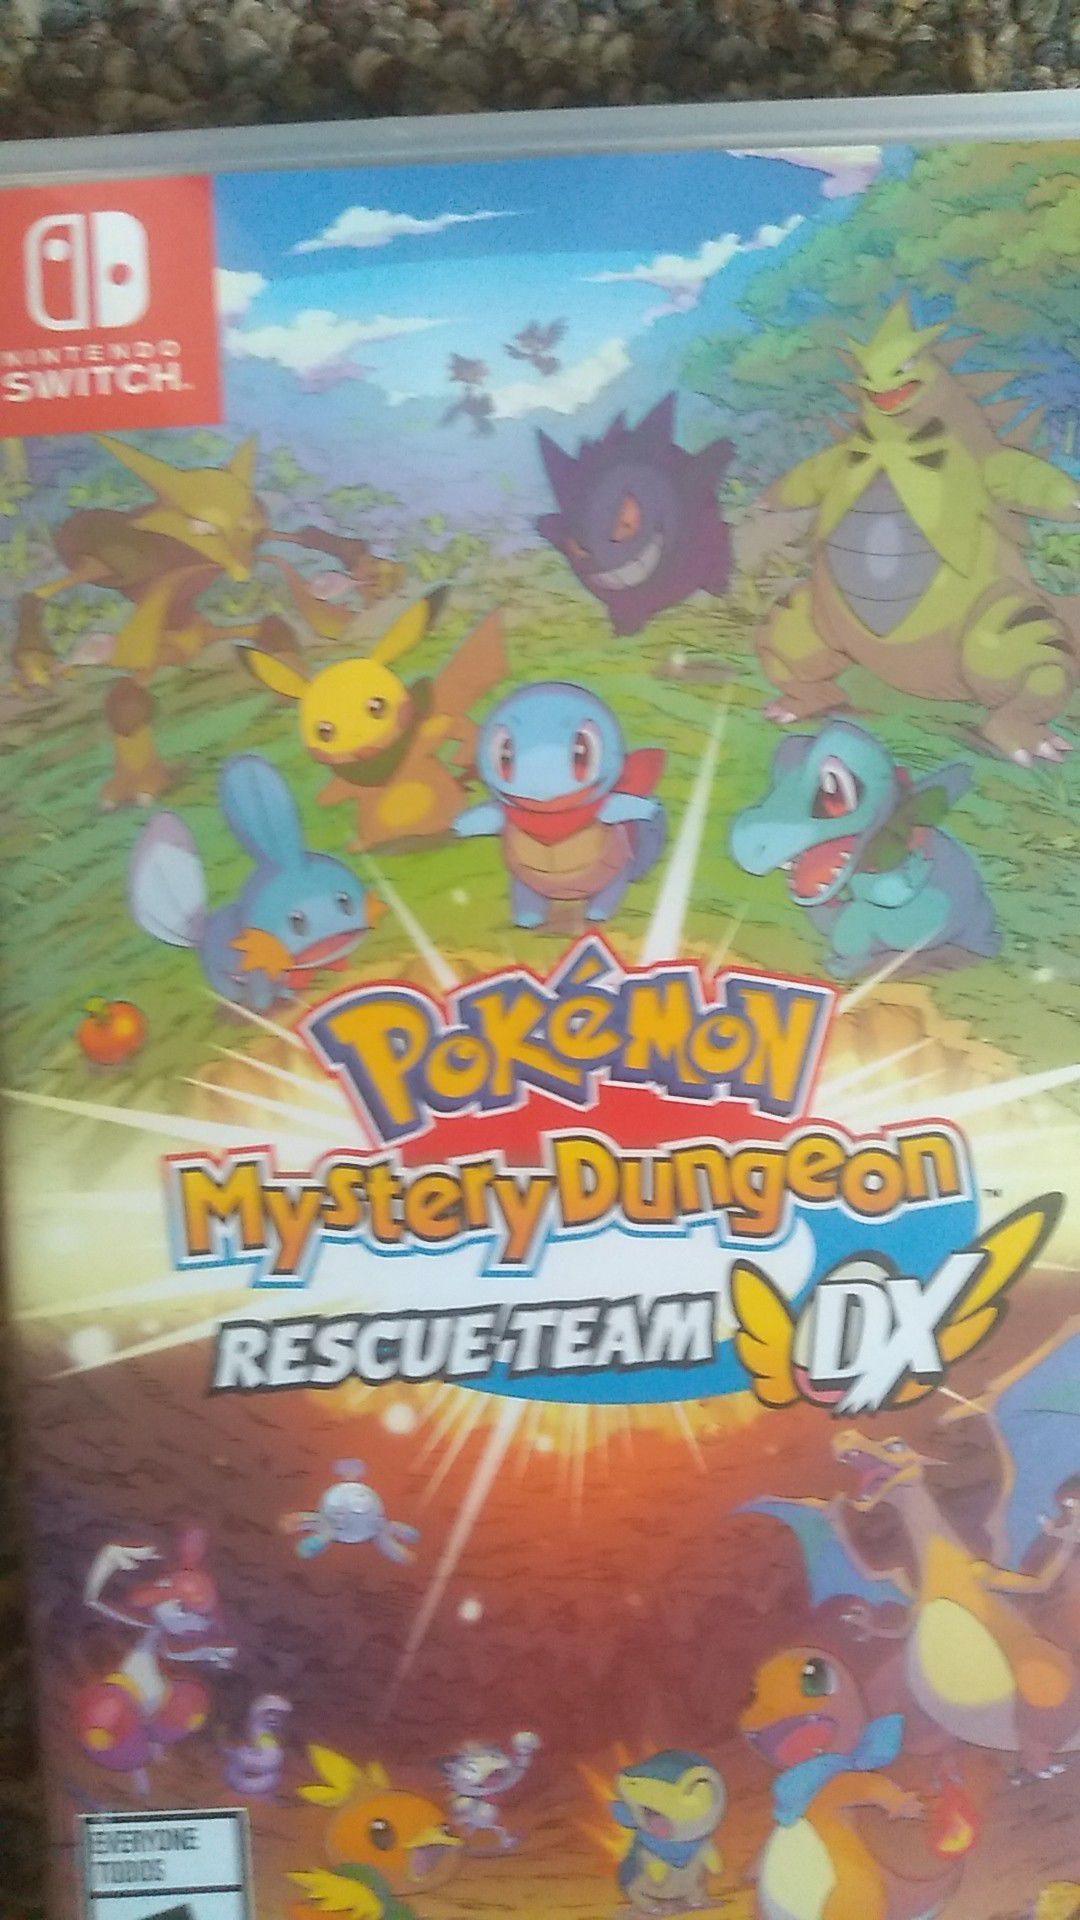 Switch Pokemon mystery dungeon red rescue team DX